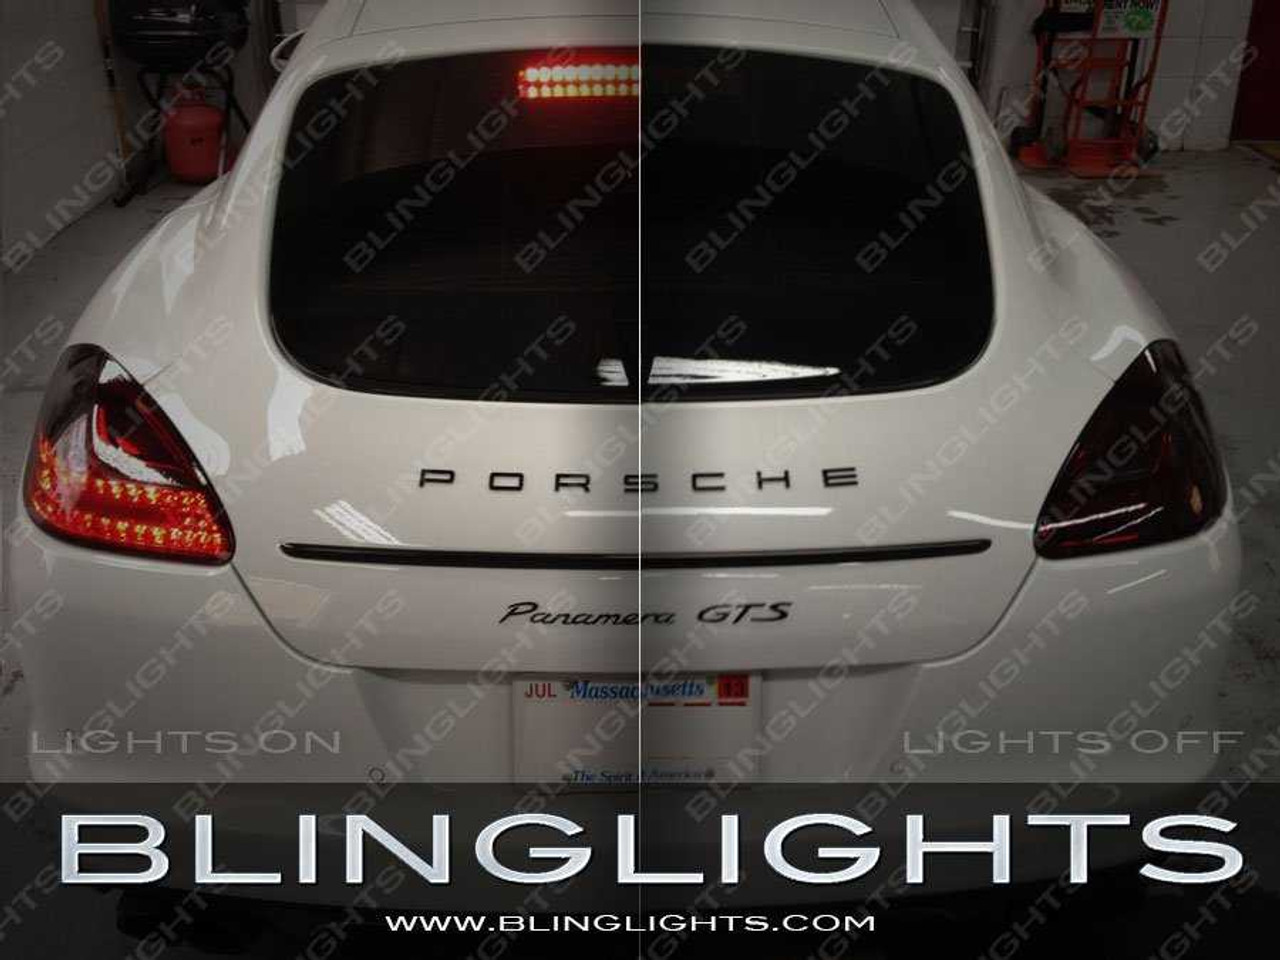 BlingLights Brand Tinted Protective Taillamp Film Covers for Nissan Qashqai (all years)